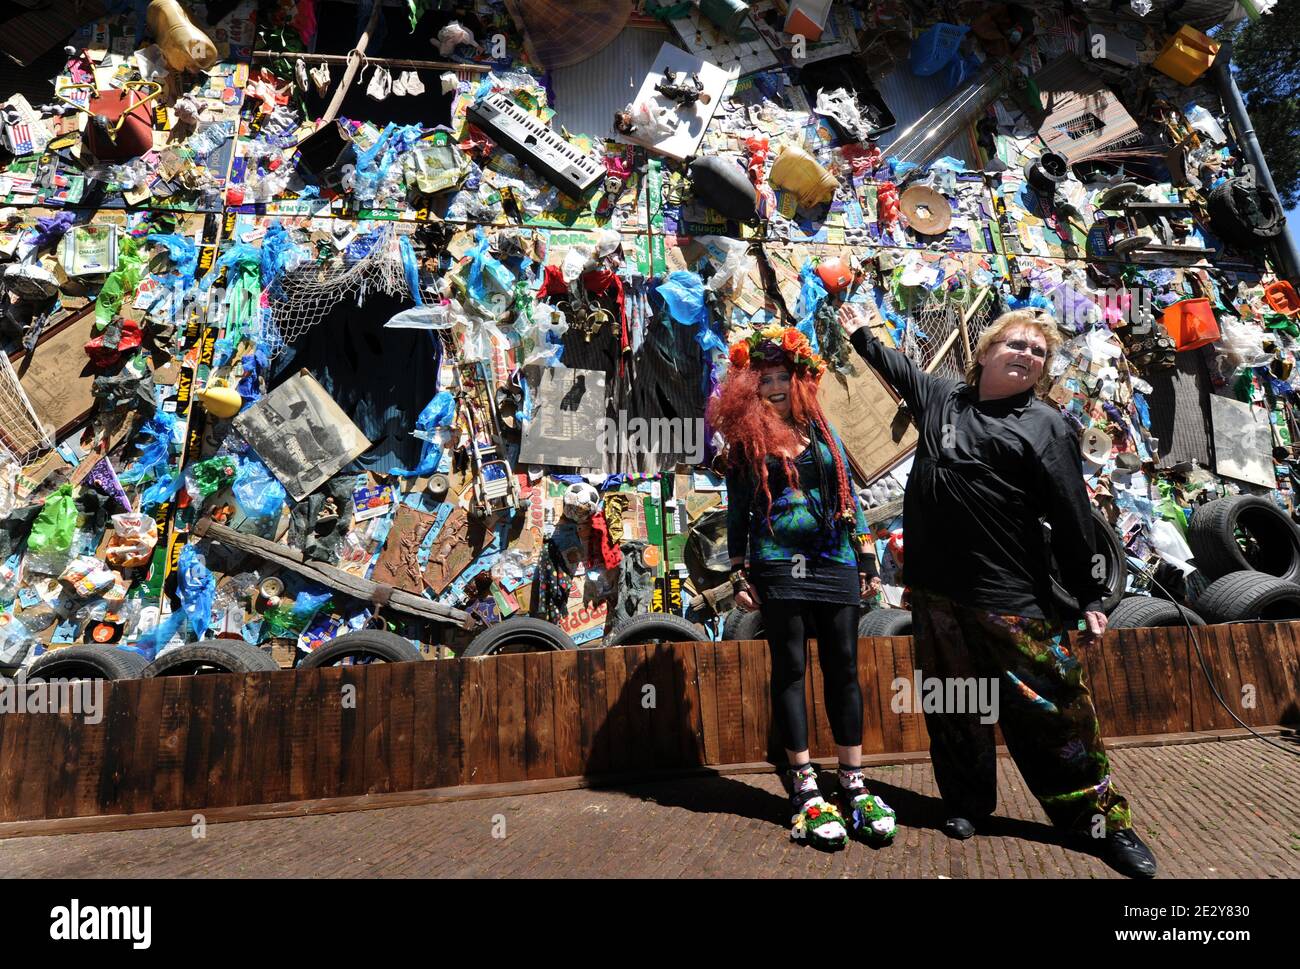 German action artist HA Schult and his wife Elke Koska present the first hotel made of trash in the world opened next to Castel SantÍAngelo in Rome,Italy on June 4, 2010. The 'Corona Save the beach Hotel', is a hotel that has been built entirely from beach garbage.It has been conceptualized and designed by HA Schult, the German action artist, famous for his work ïTrash MenÍ-in which thousands of life-sized human figures were made entirely of non-organic waste and were placed in emblematic places all around the world- the hotel will stay open until the 6th of June and for 3 days it will remind Stock Photo